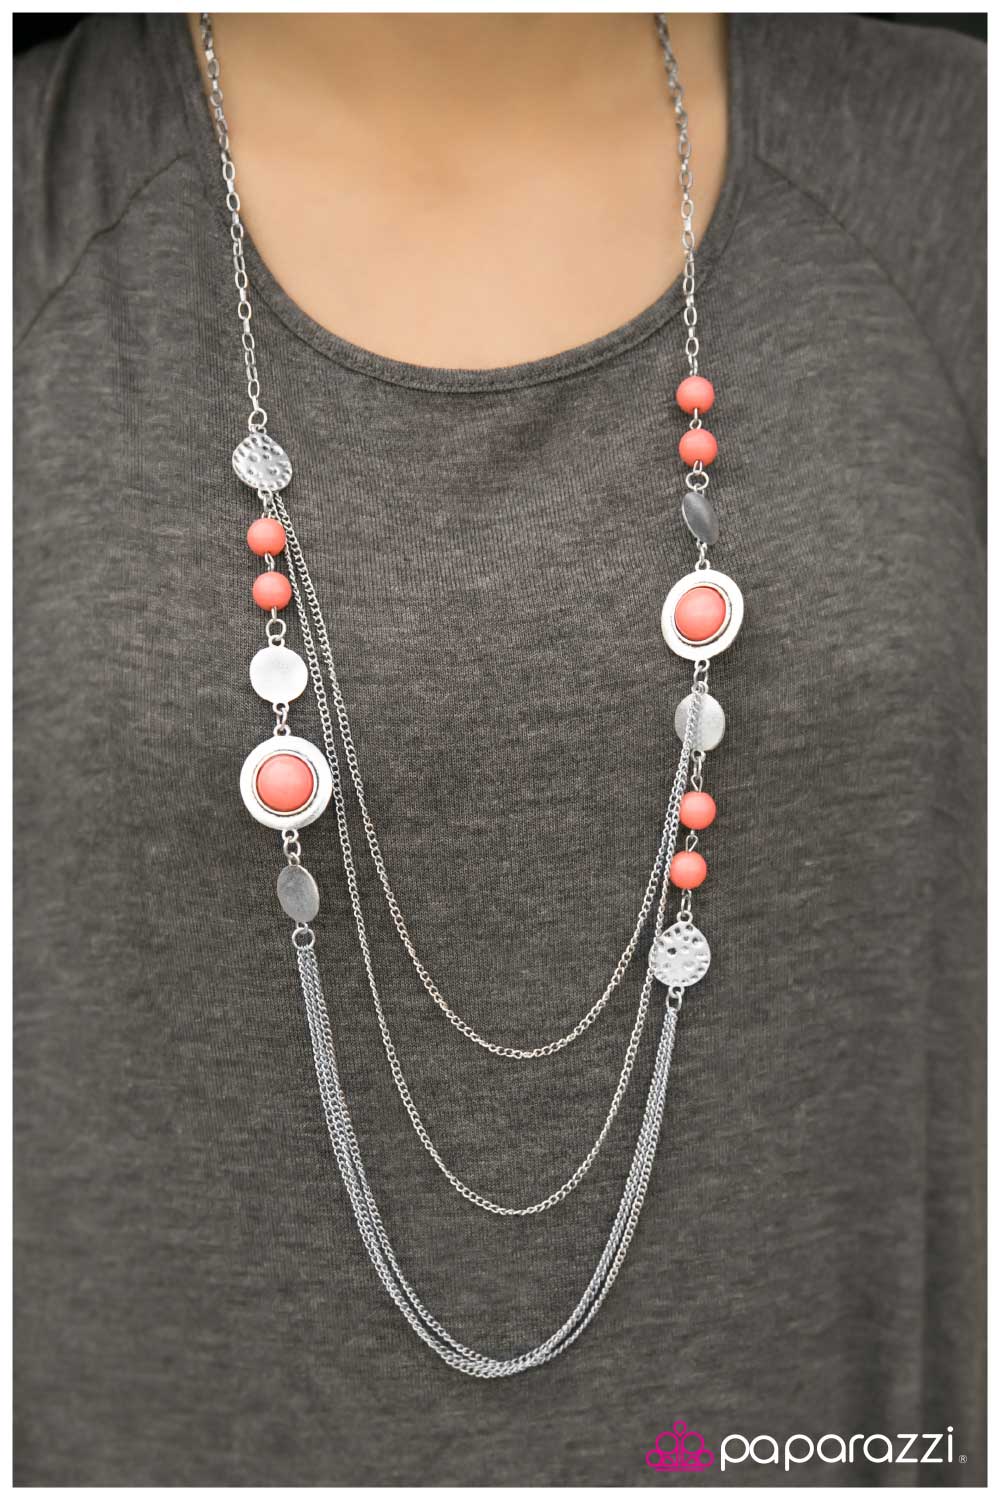 The Great Expedition - Orange - Paparazzi necklace